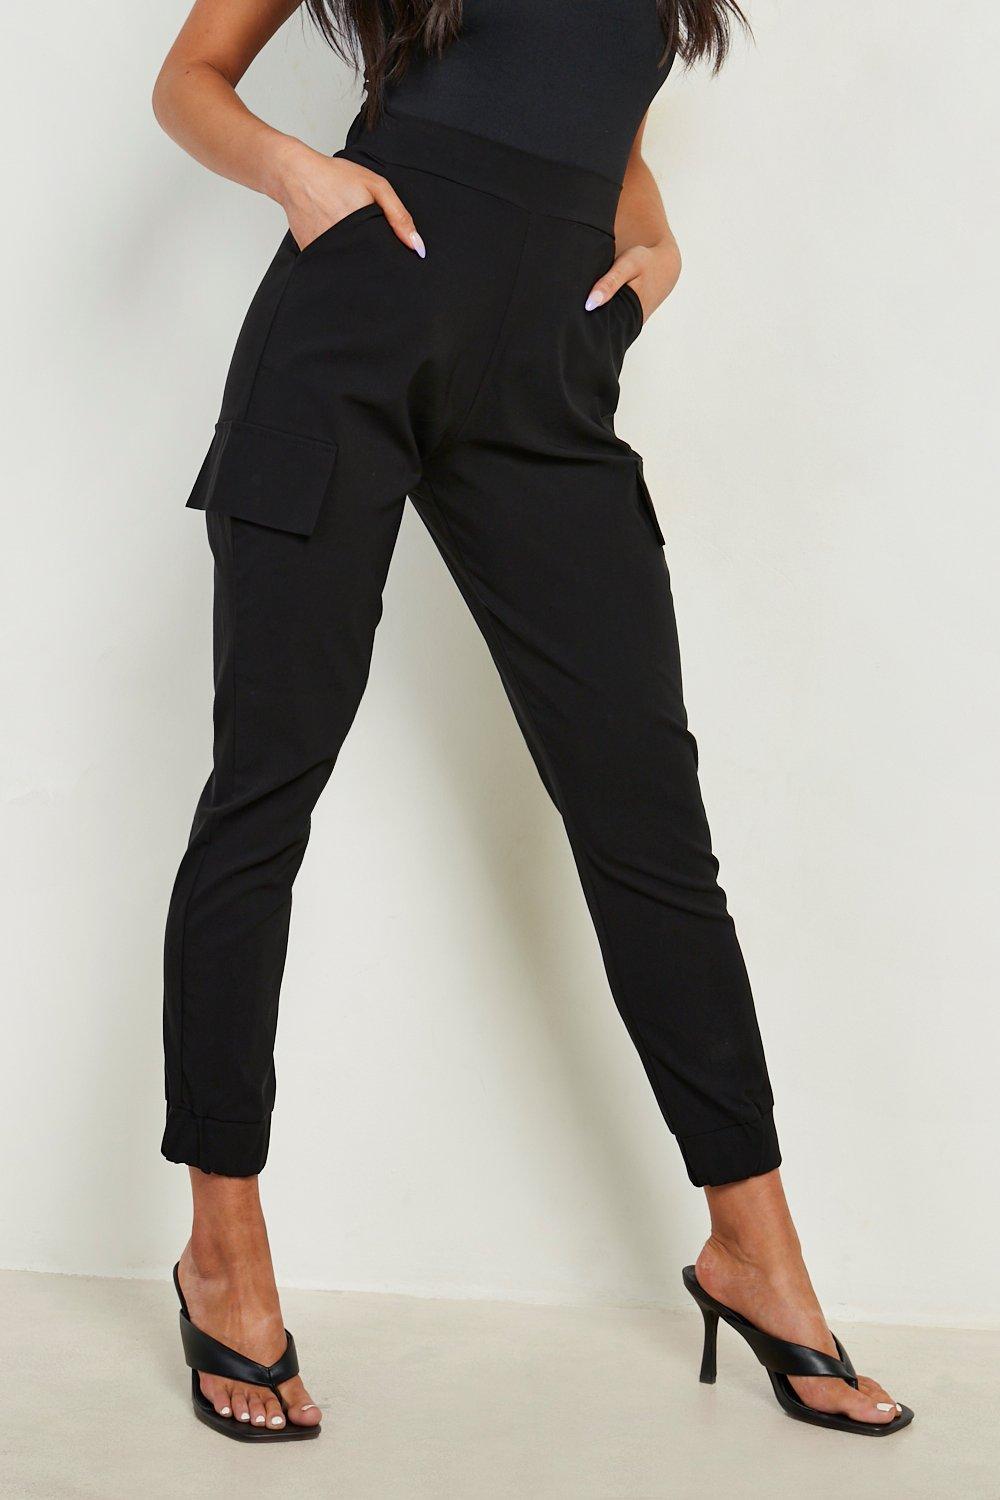 FSLE Tapered High Waisted Capris For Women Spring Next Petite